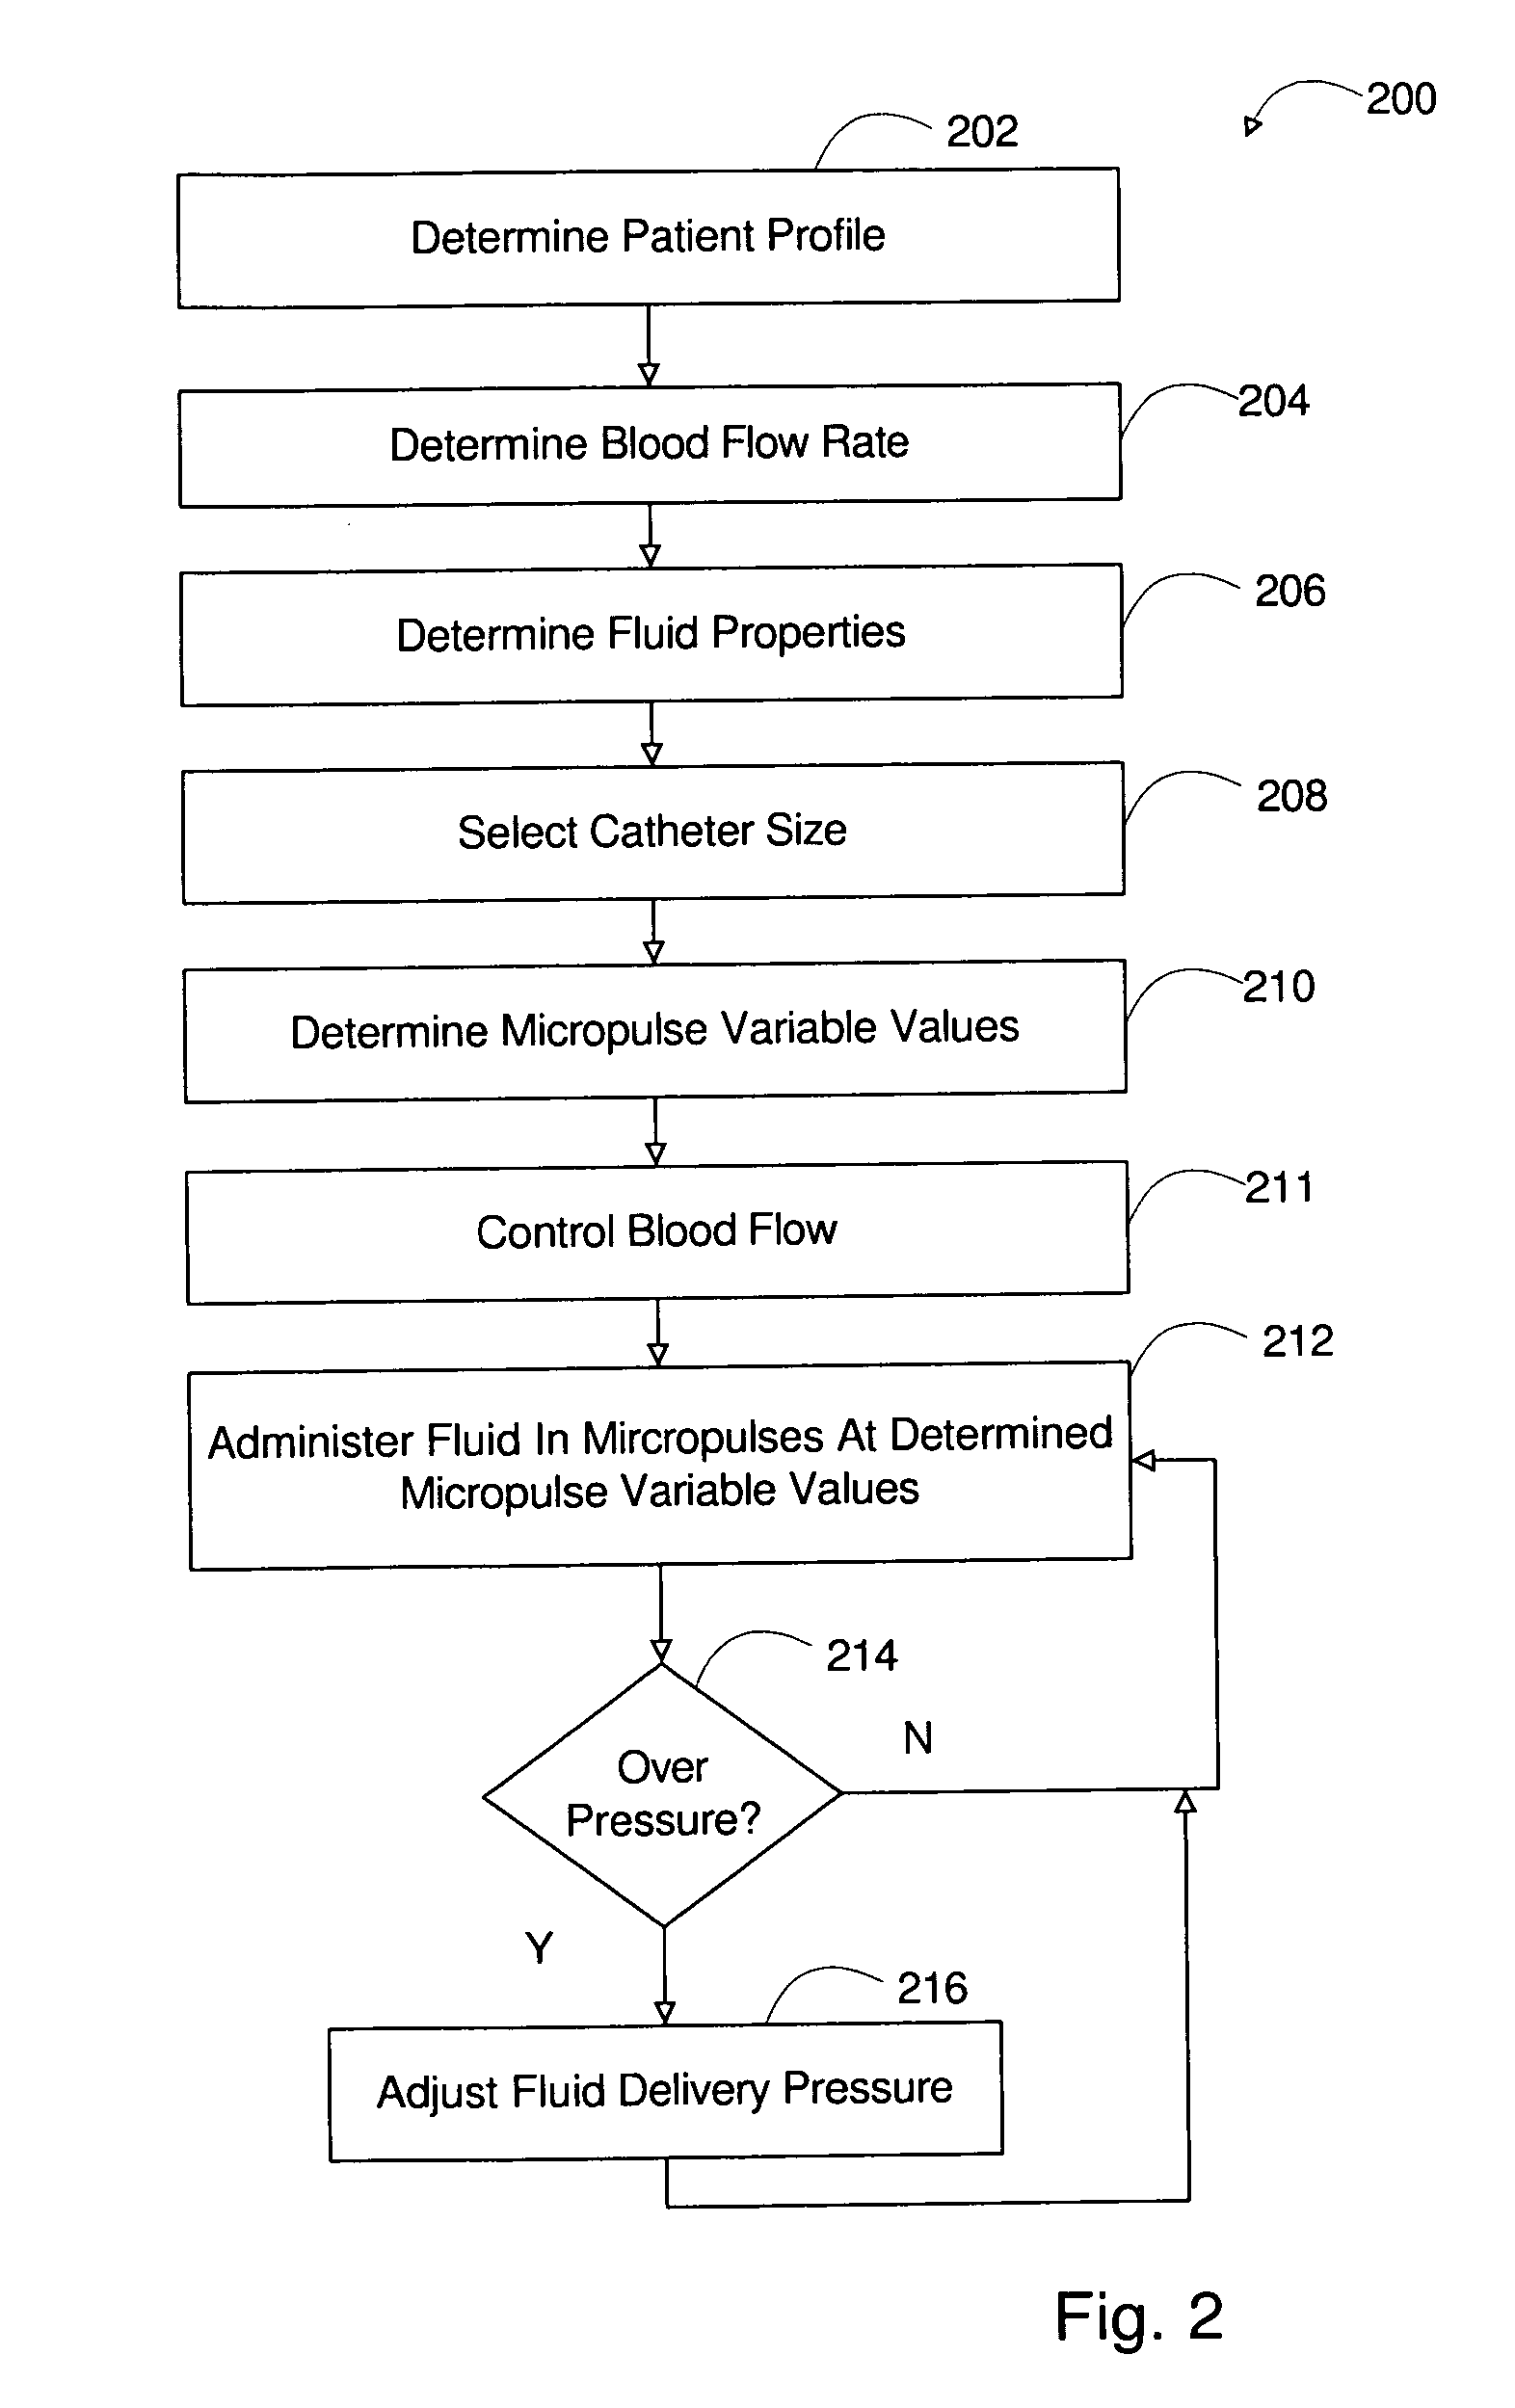 Programmed pulsed infusion methods and devices